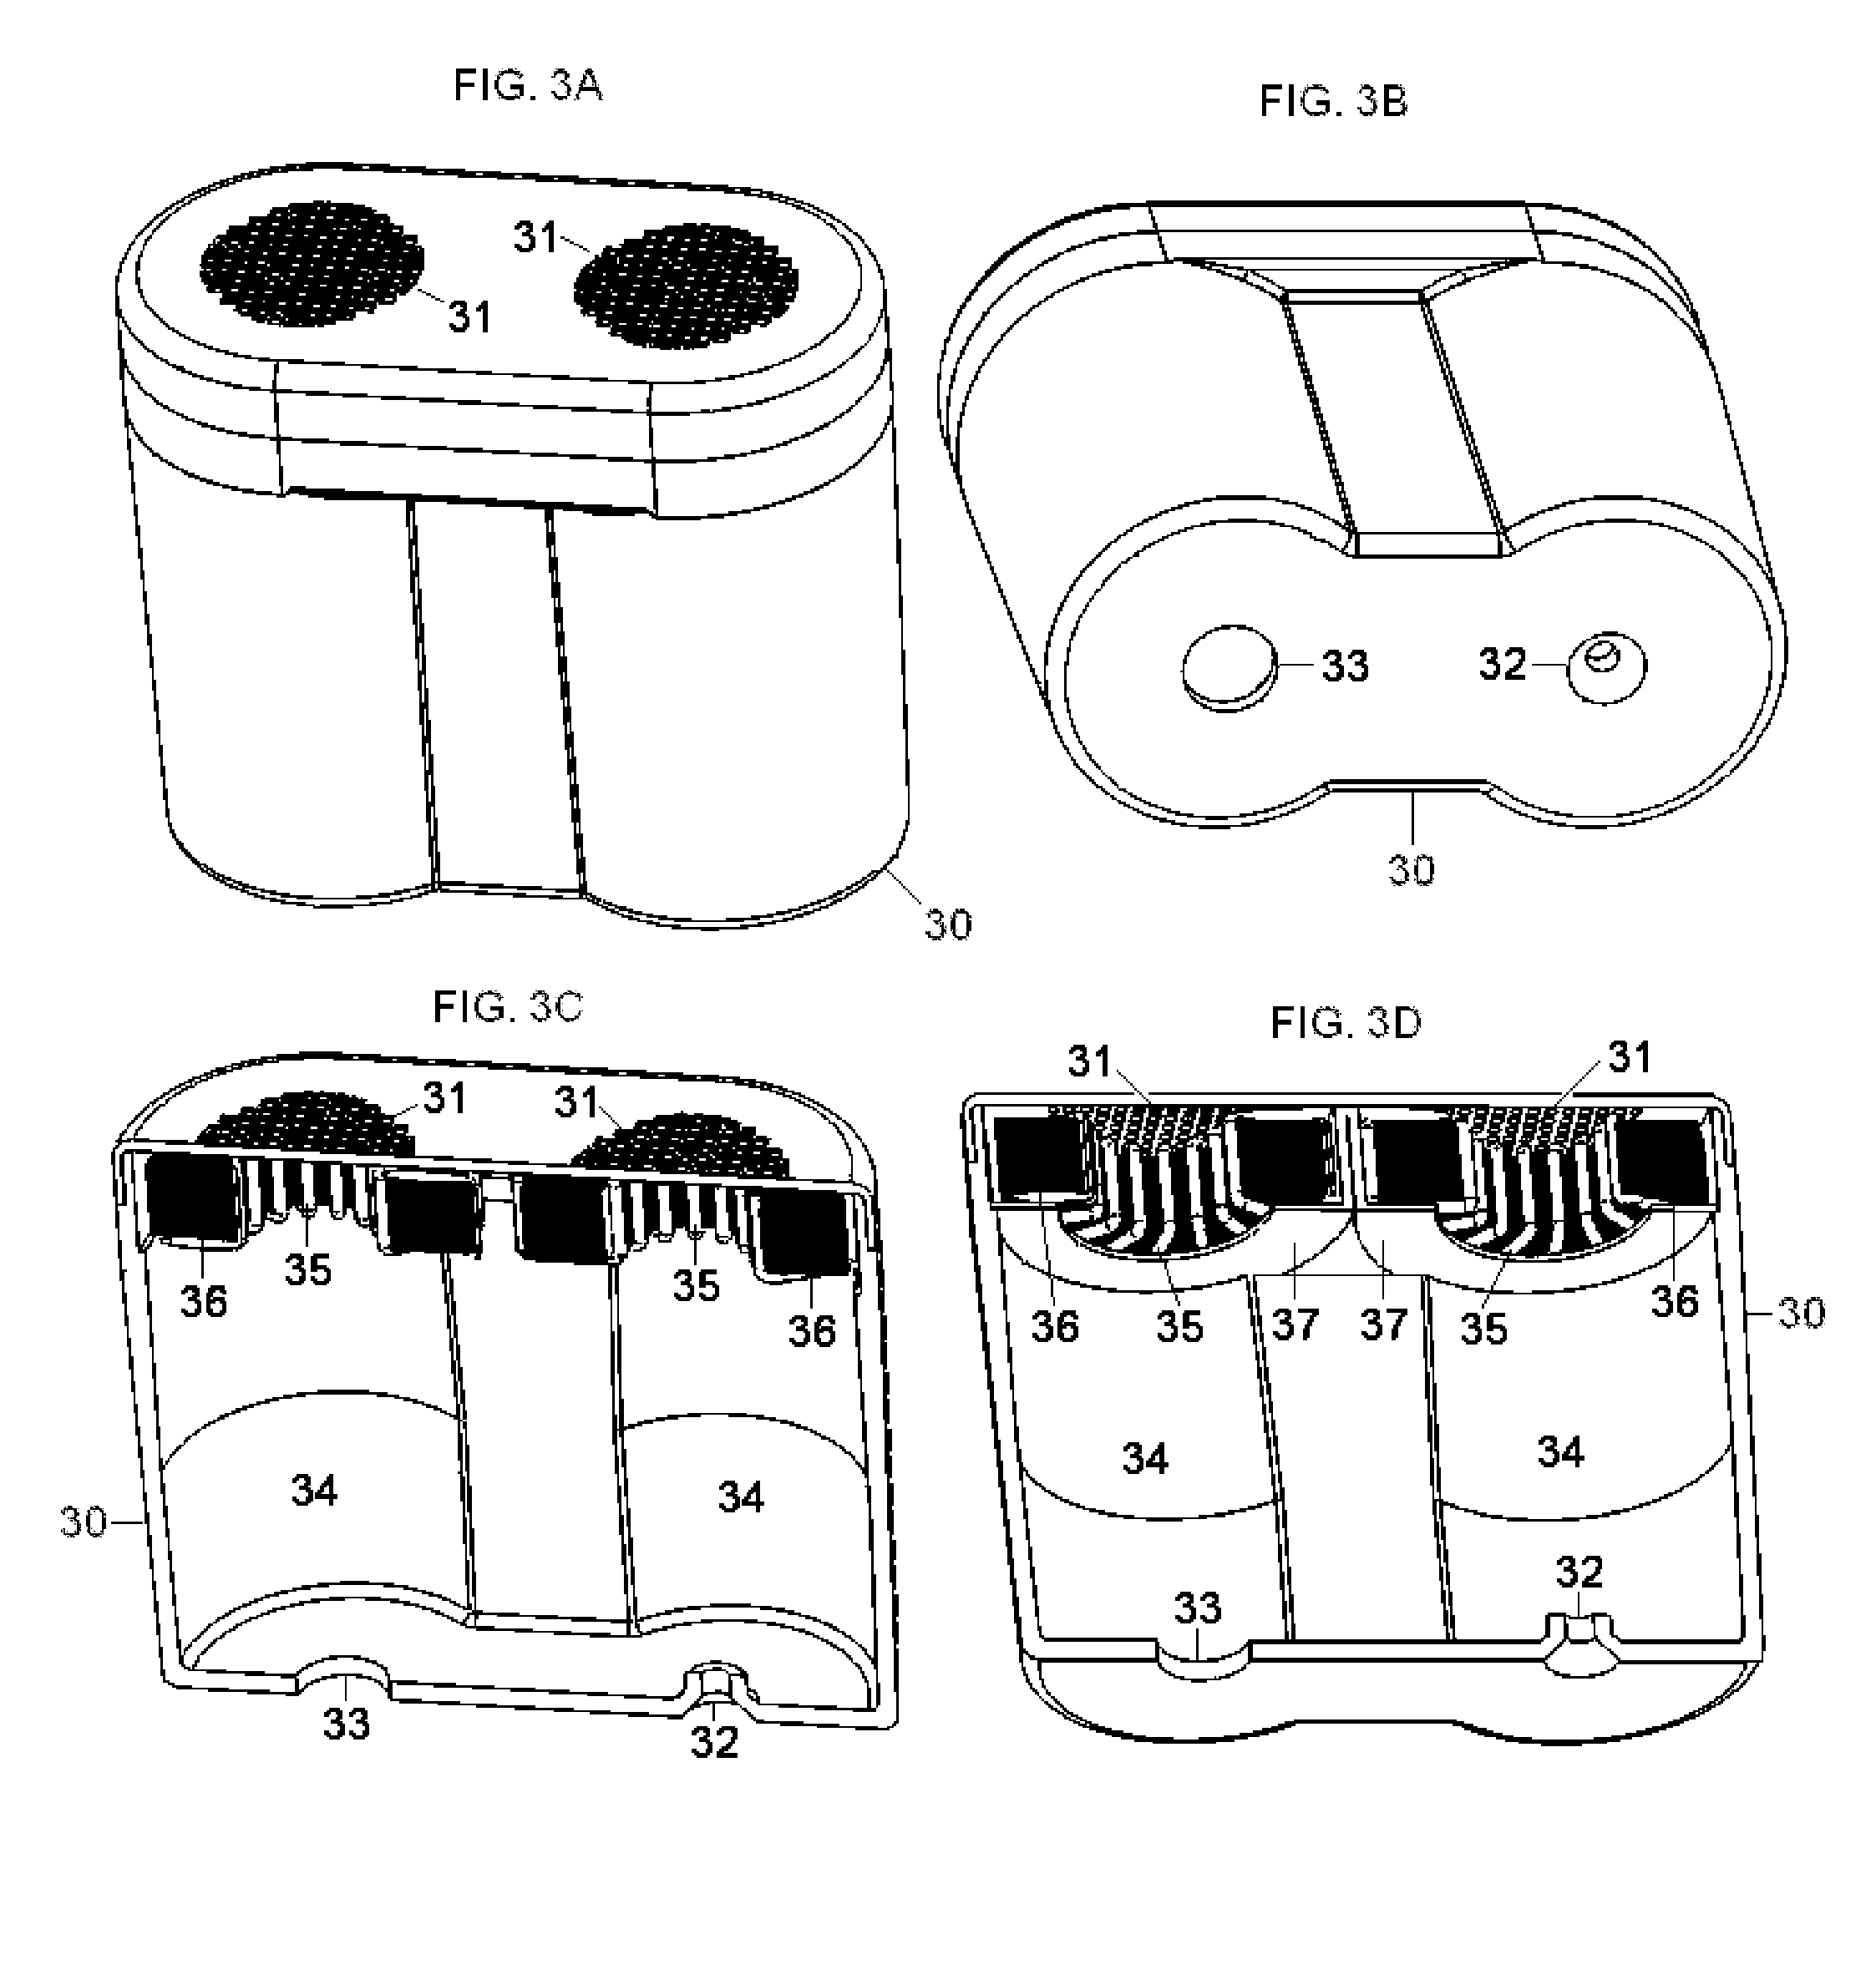 Magnetic Stimulation Devices and Methods of Therapy